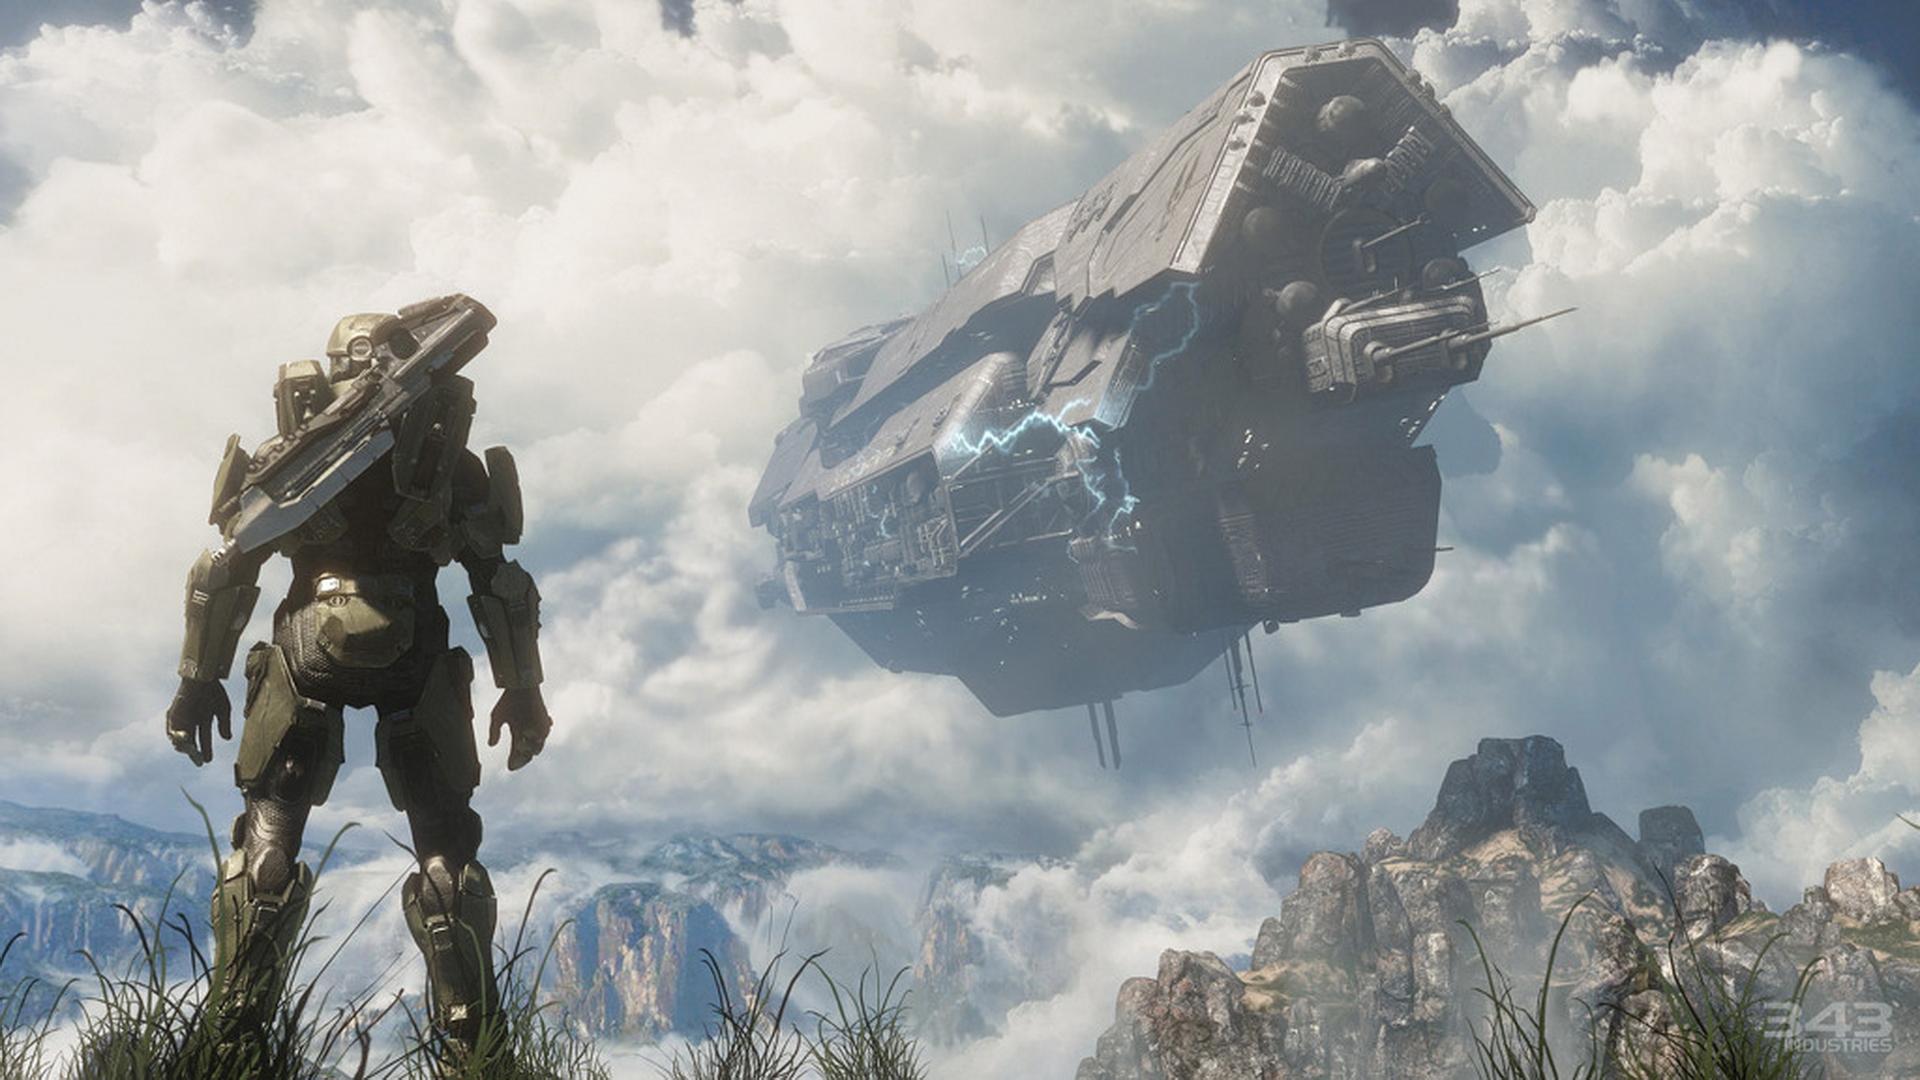 Halo Video Game Art Video Games Spaceship Science Fiction Halo 4 UNSC Infinity Master Chief Spartans 1920x1080